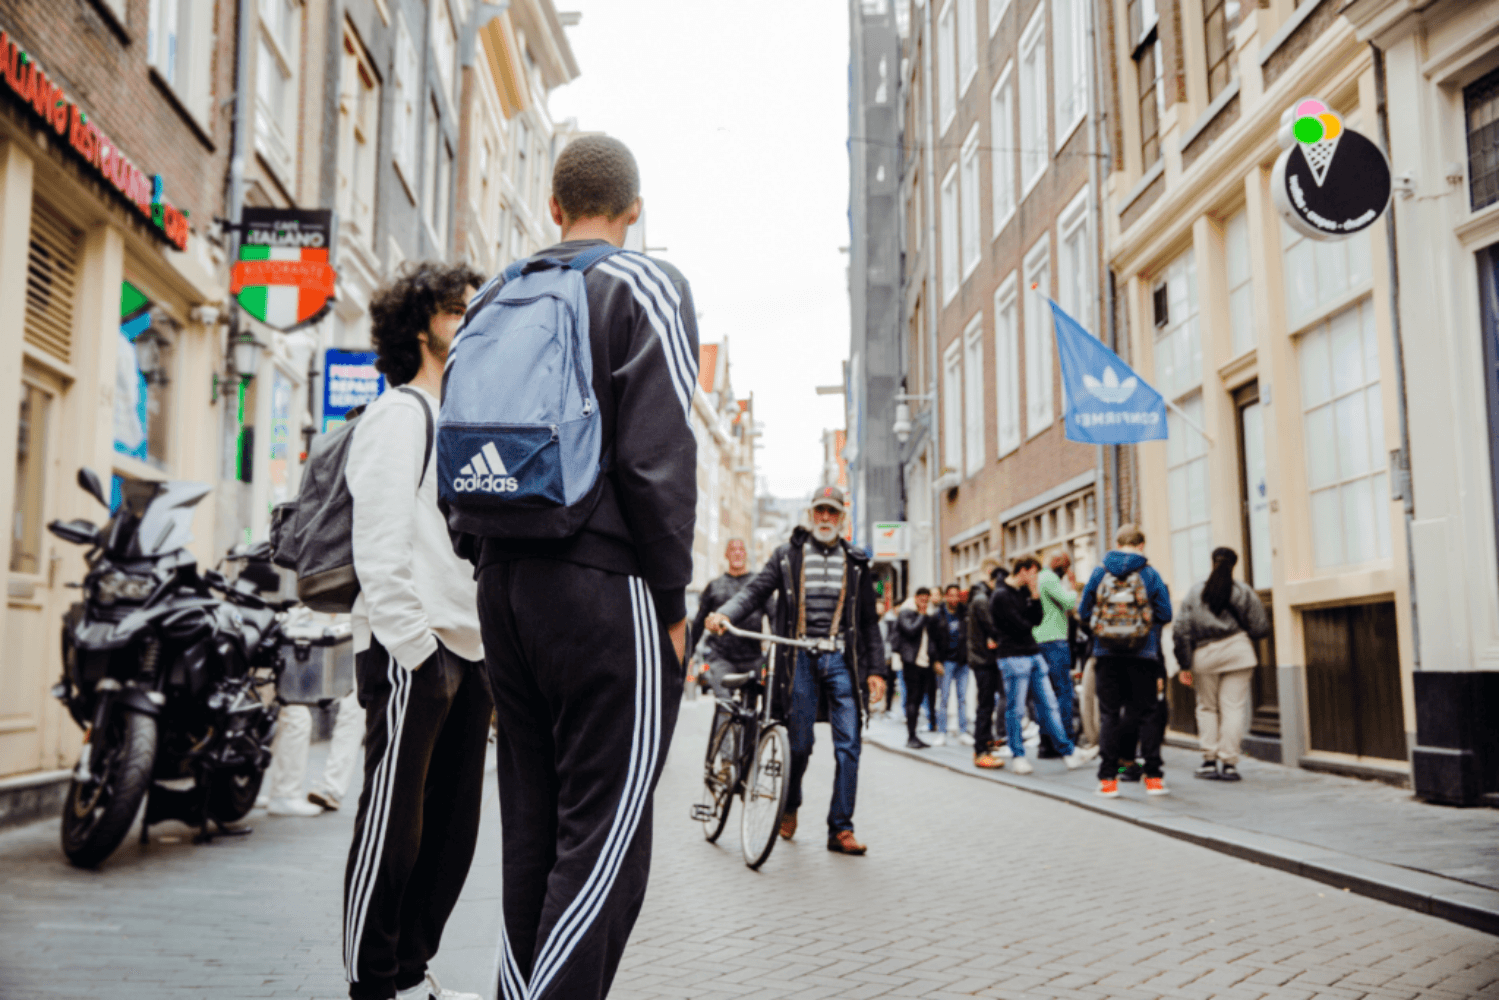 A look back at the adidas CONFIRMED Pop-Up event in Amsterdam